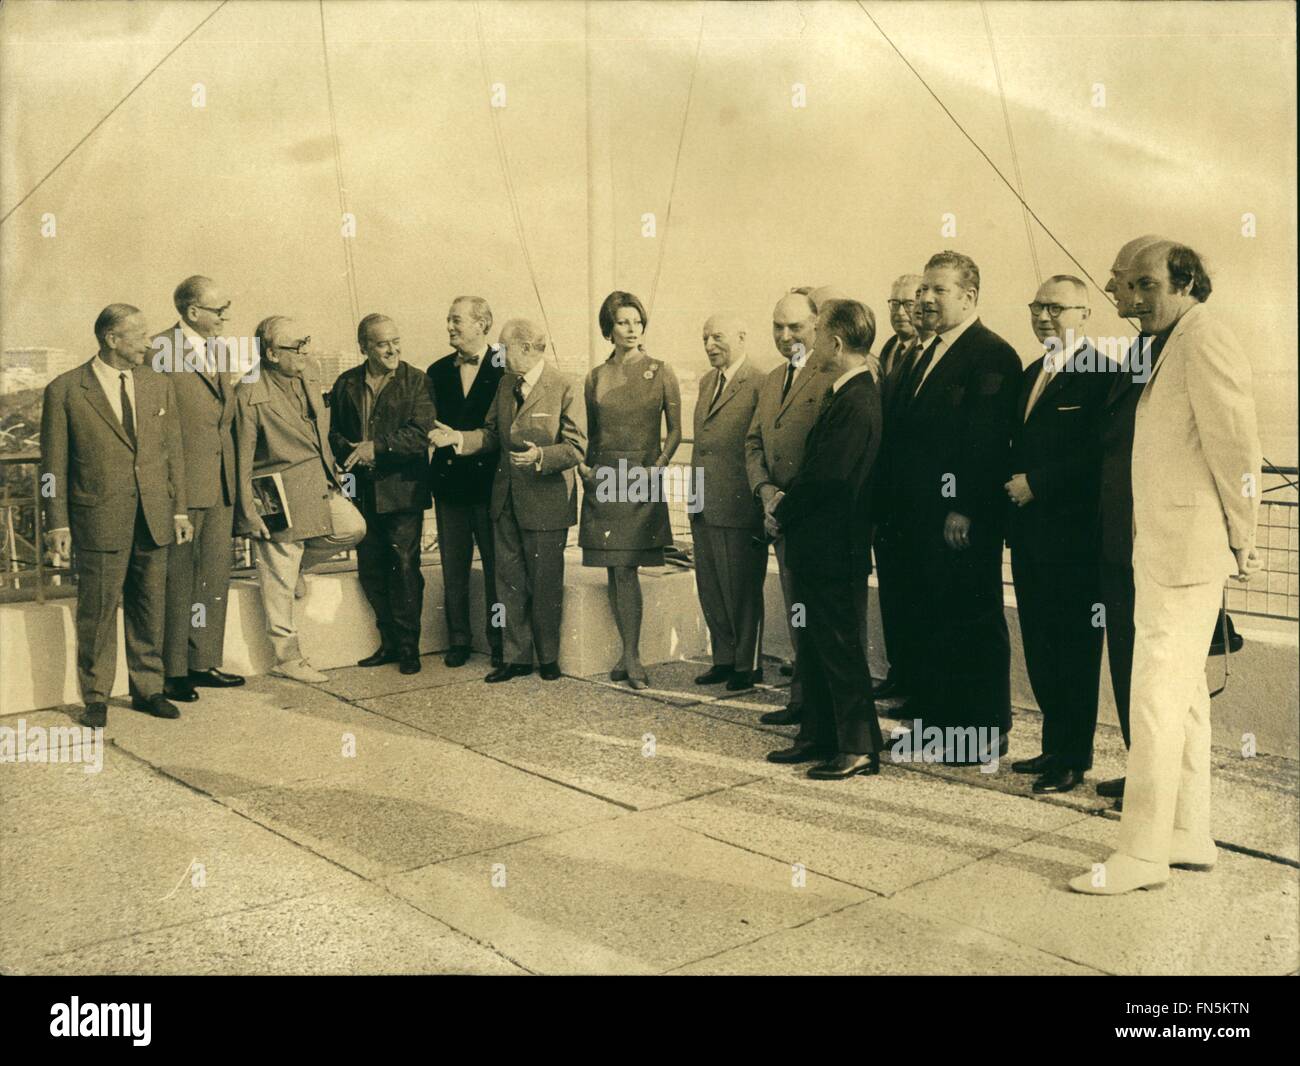 1948 - Cannes film Festival : The Annual film Festival opened in Cannes yesterday. Photo shows Pictured on the oof the Palais Du festival members of the Jury. Marcel Acd (3rd From L.) Pagnol, Sophia Loren, President, Peter Ustinov (right) etc. © Keystone Pictures USA/ZUMAPRESS.com/Alamy Live News Stock Photo